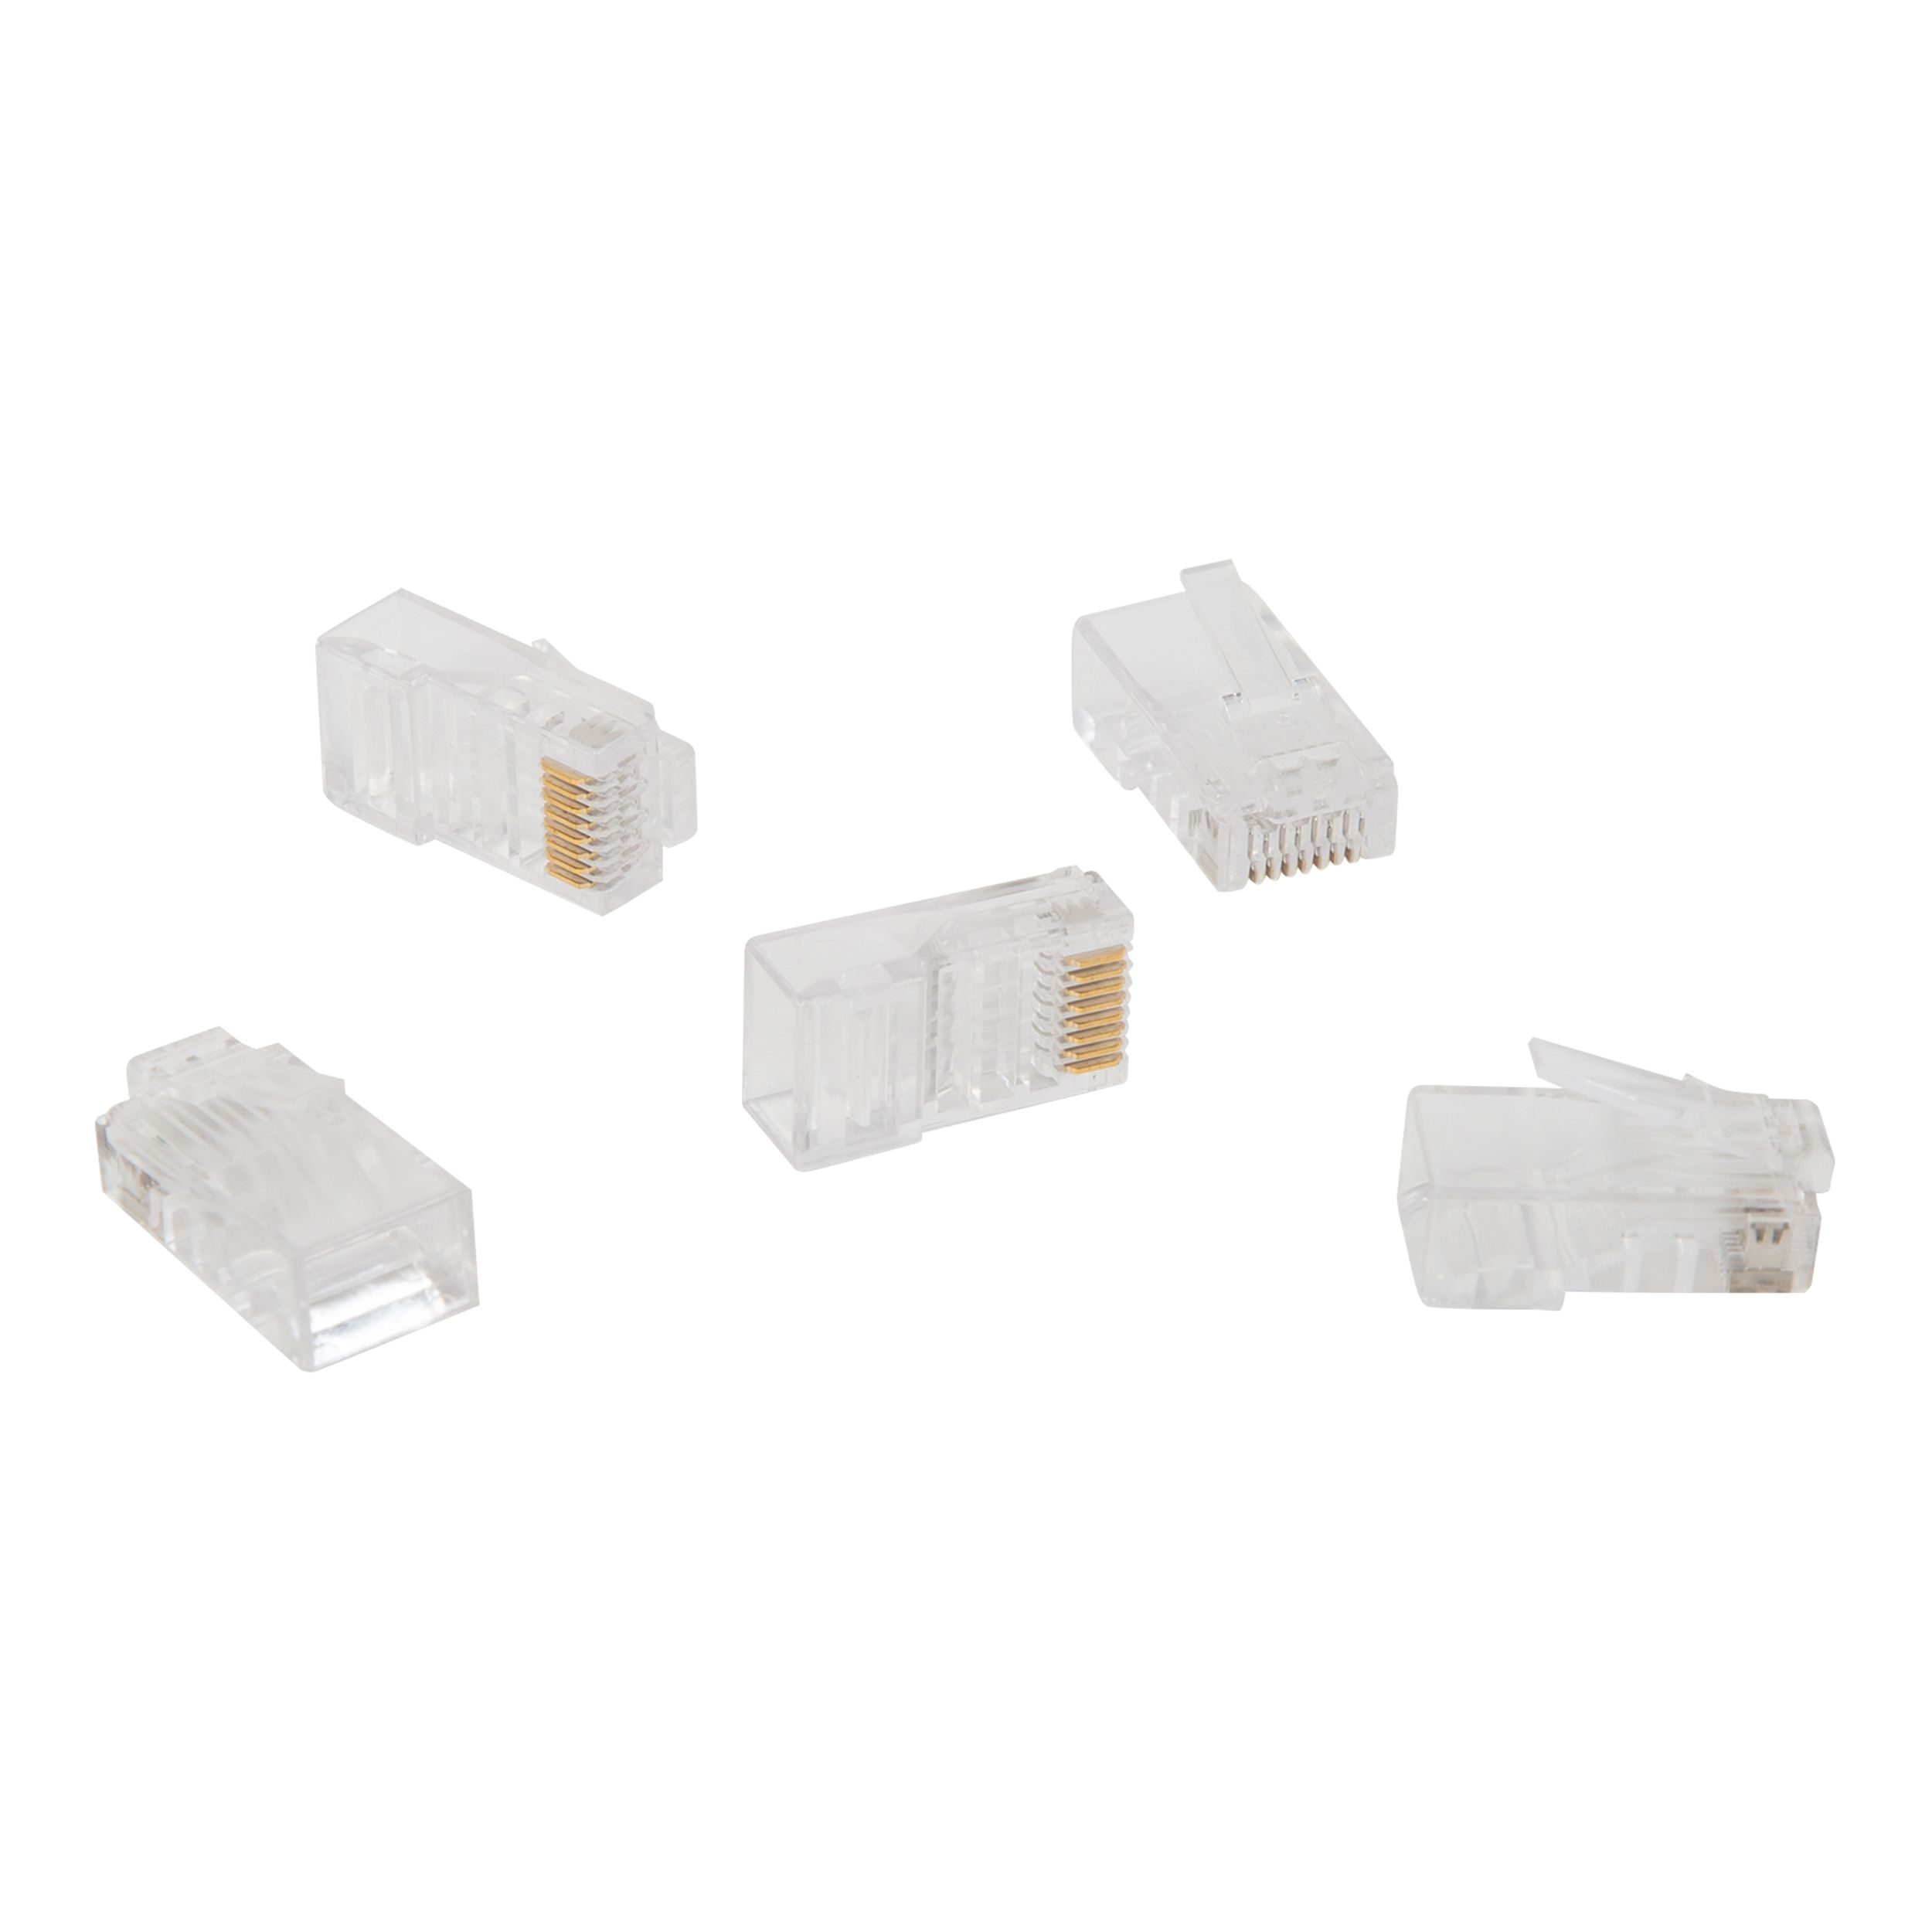 SLX CAT 5E RJ45 Clear 1 way Cable connector, Pack of 10